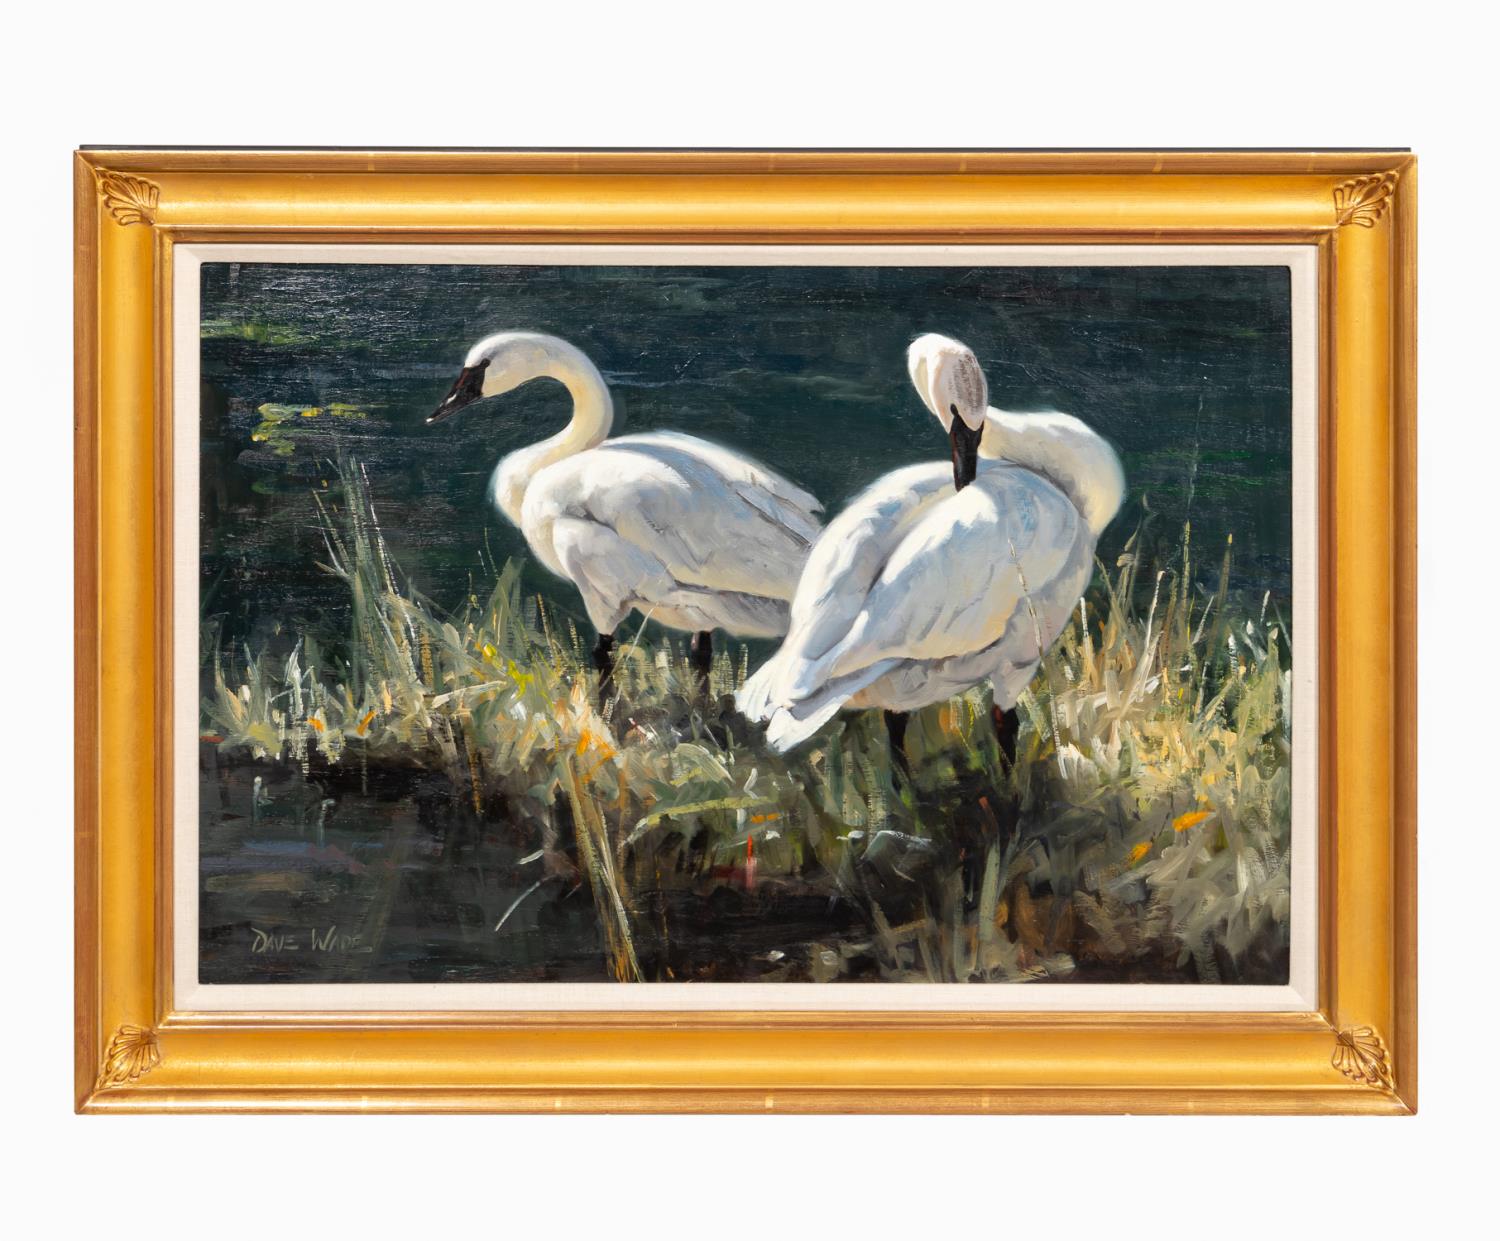 DAVE WADE, TWO SWANS, OIL ON PANEL,